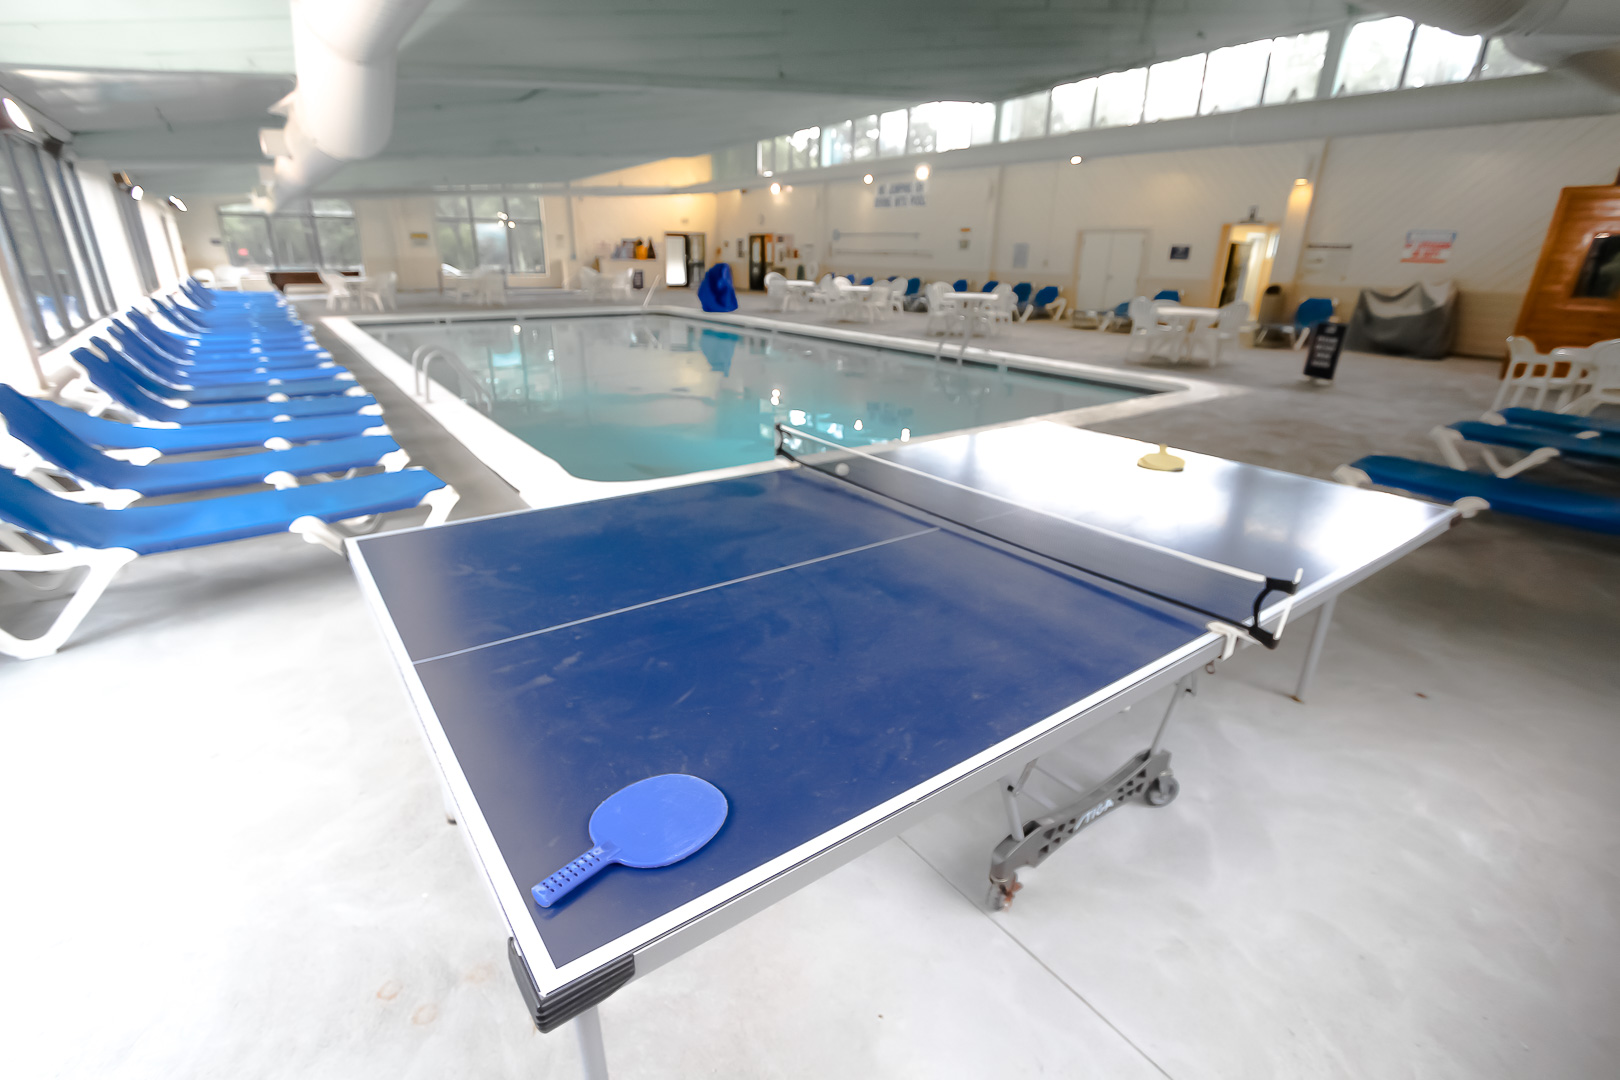 An indoor swimming pool with ping pong table VRI's Sea Mist Resort in Massachusetts.